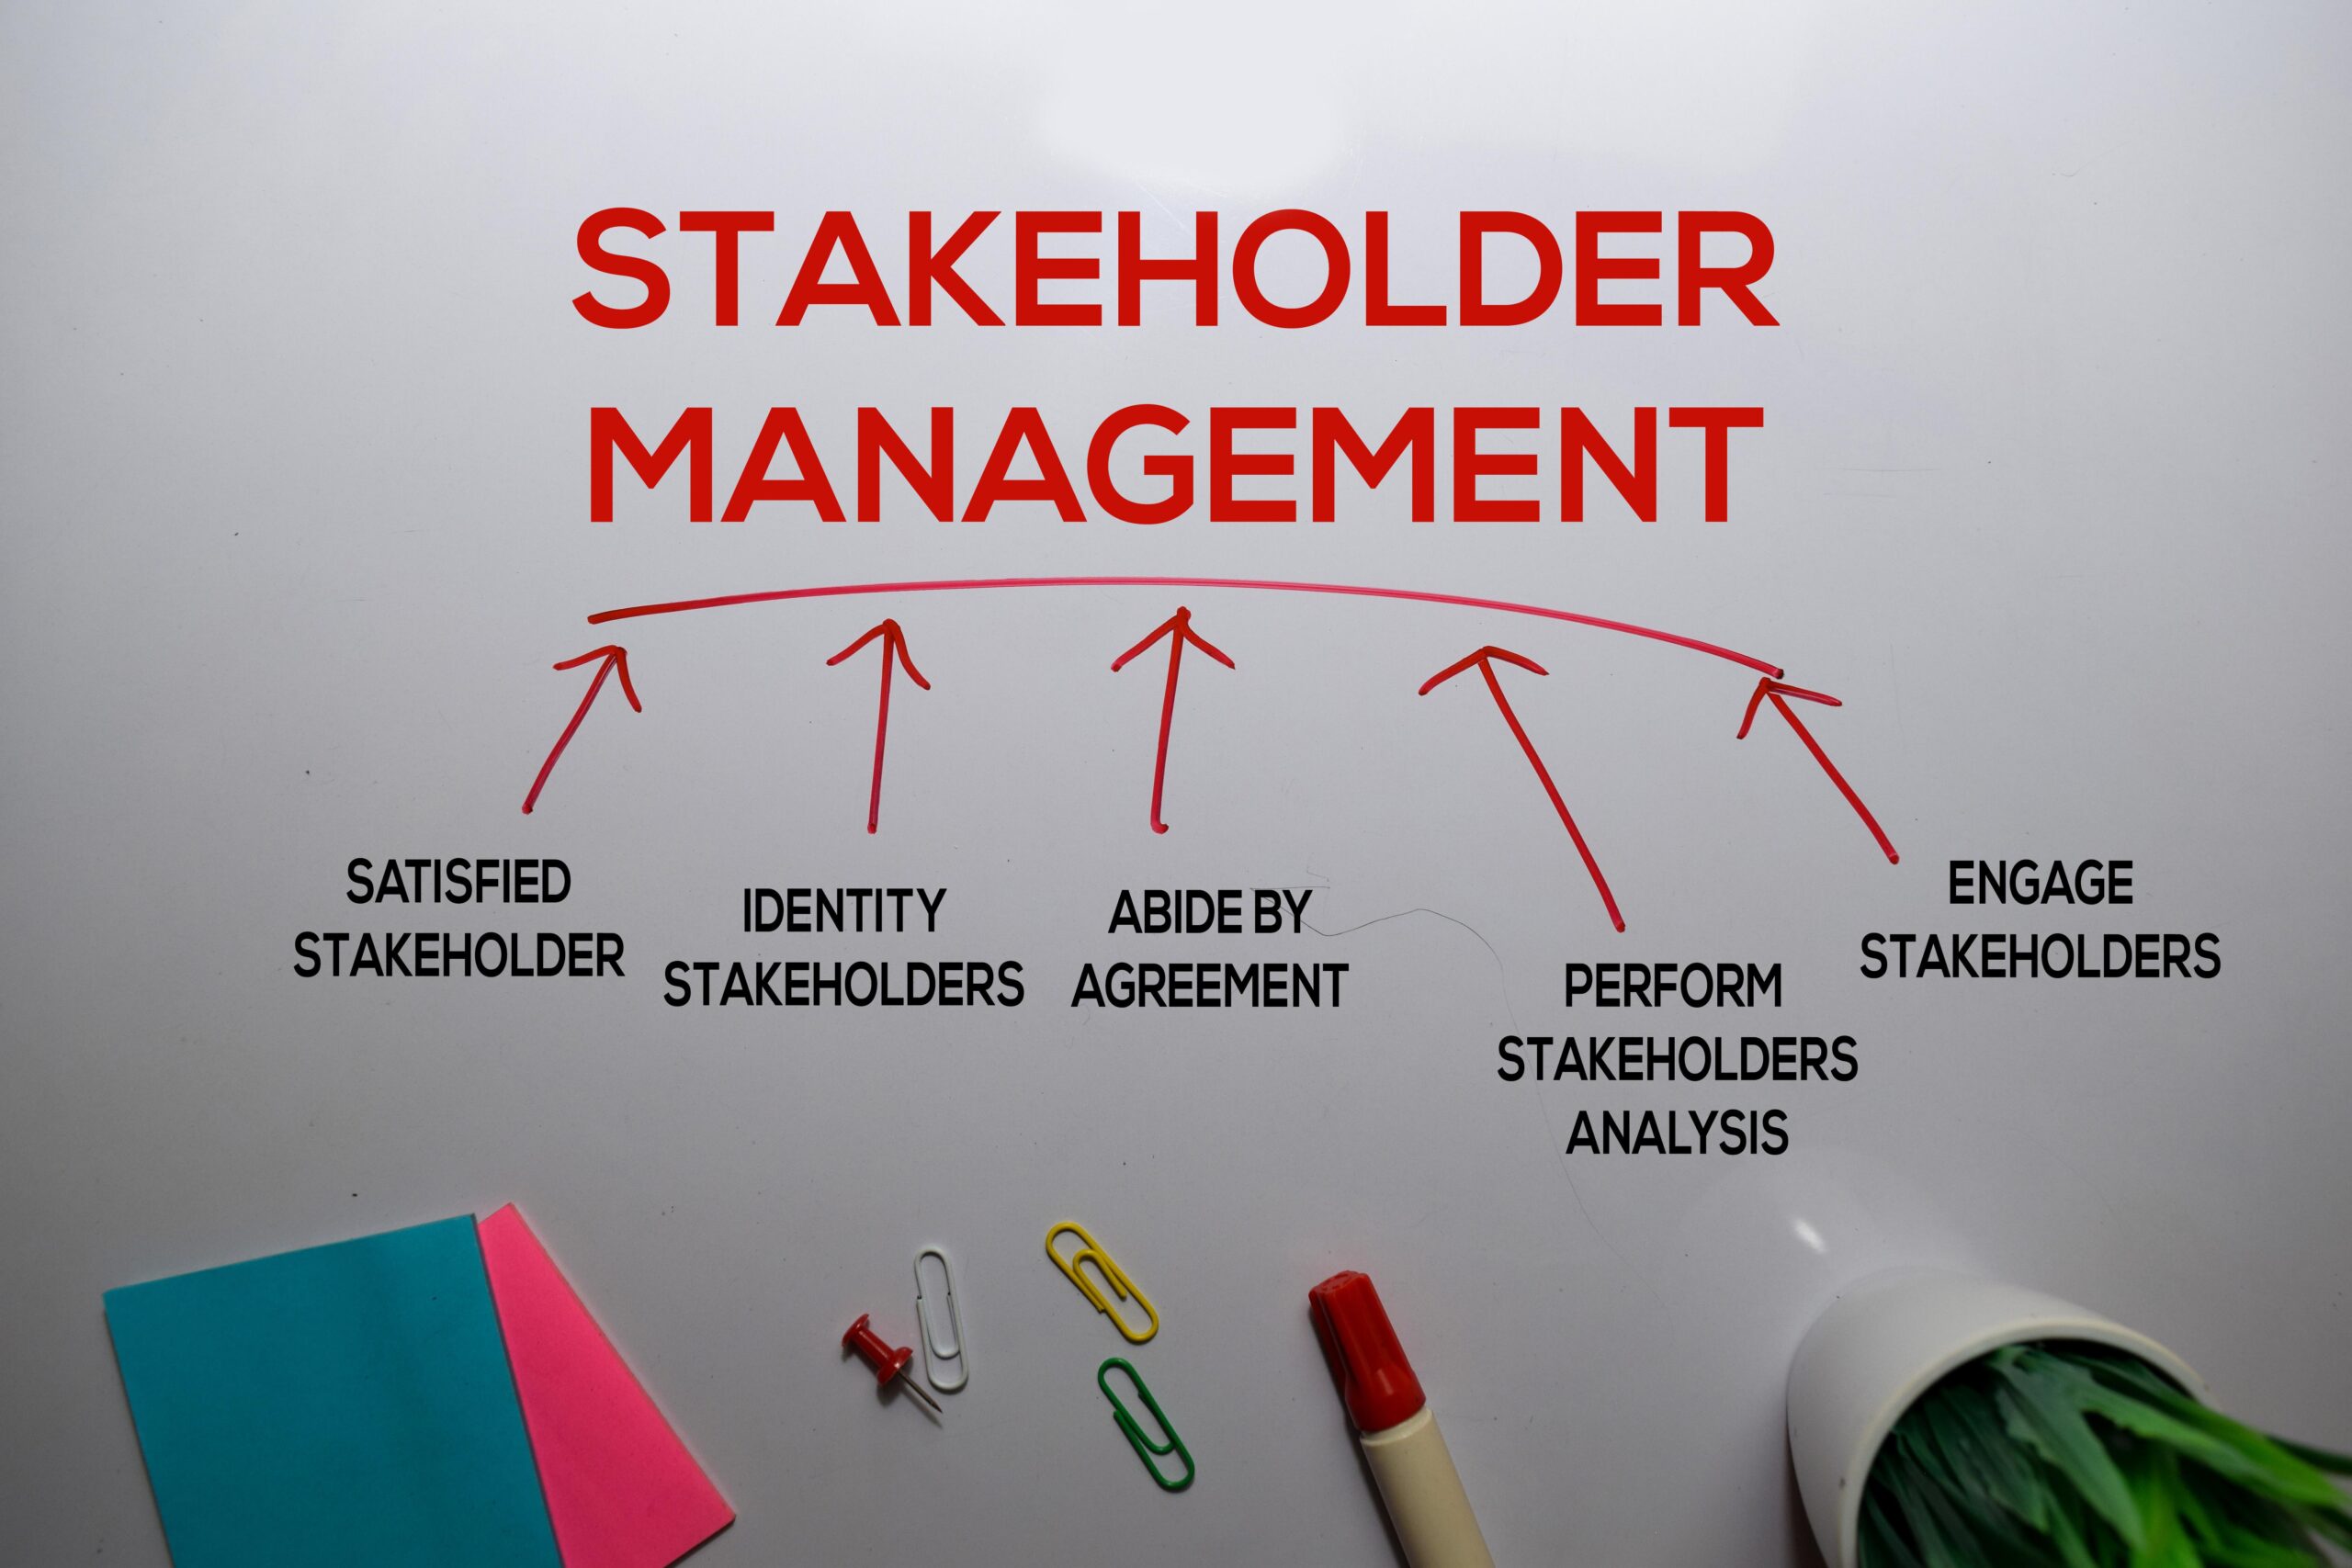 Stakeholder Capitalism: a sustainable approach